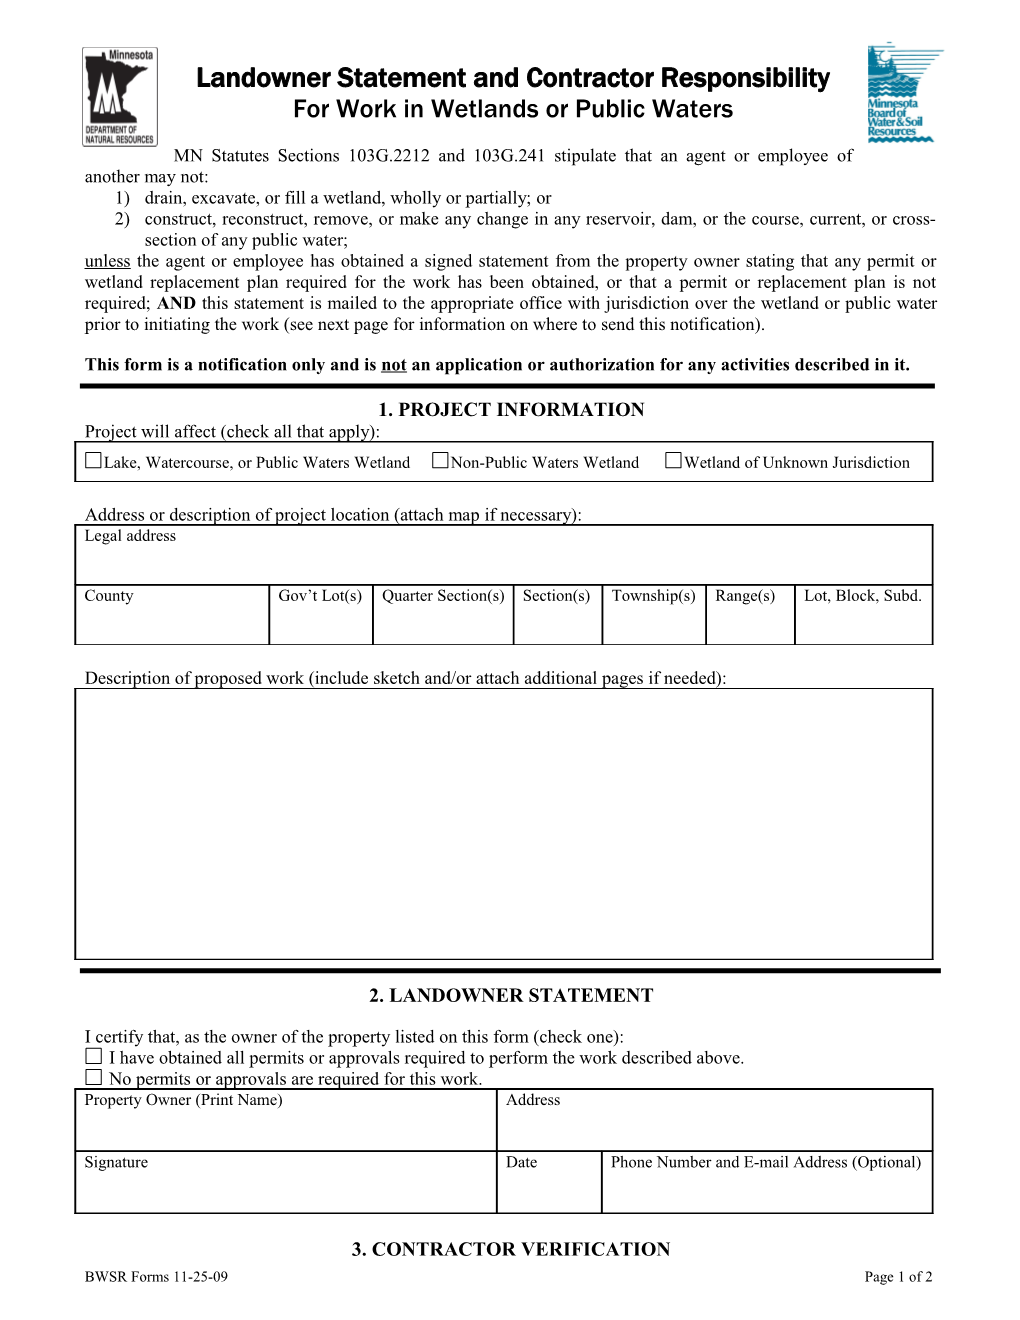 Contractor Responsibility Form